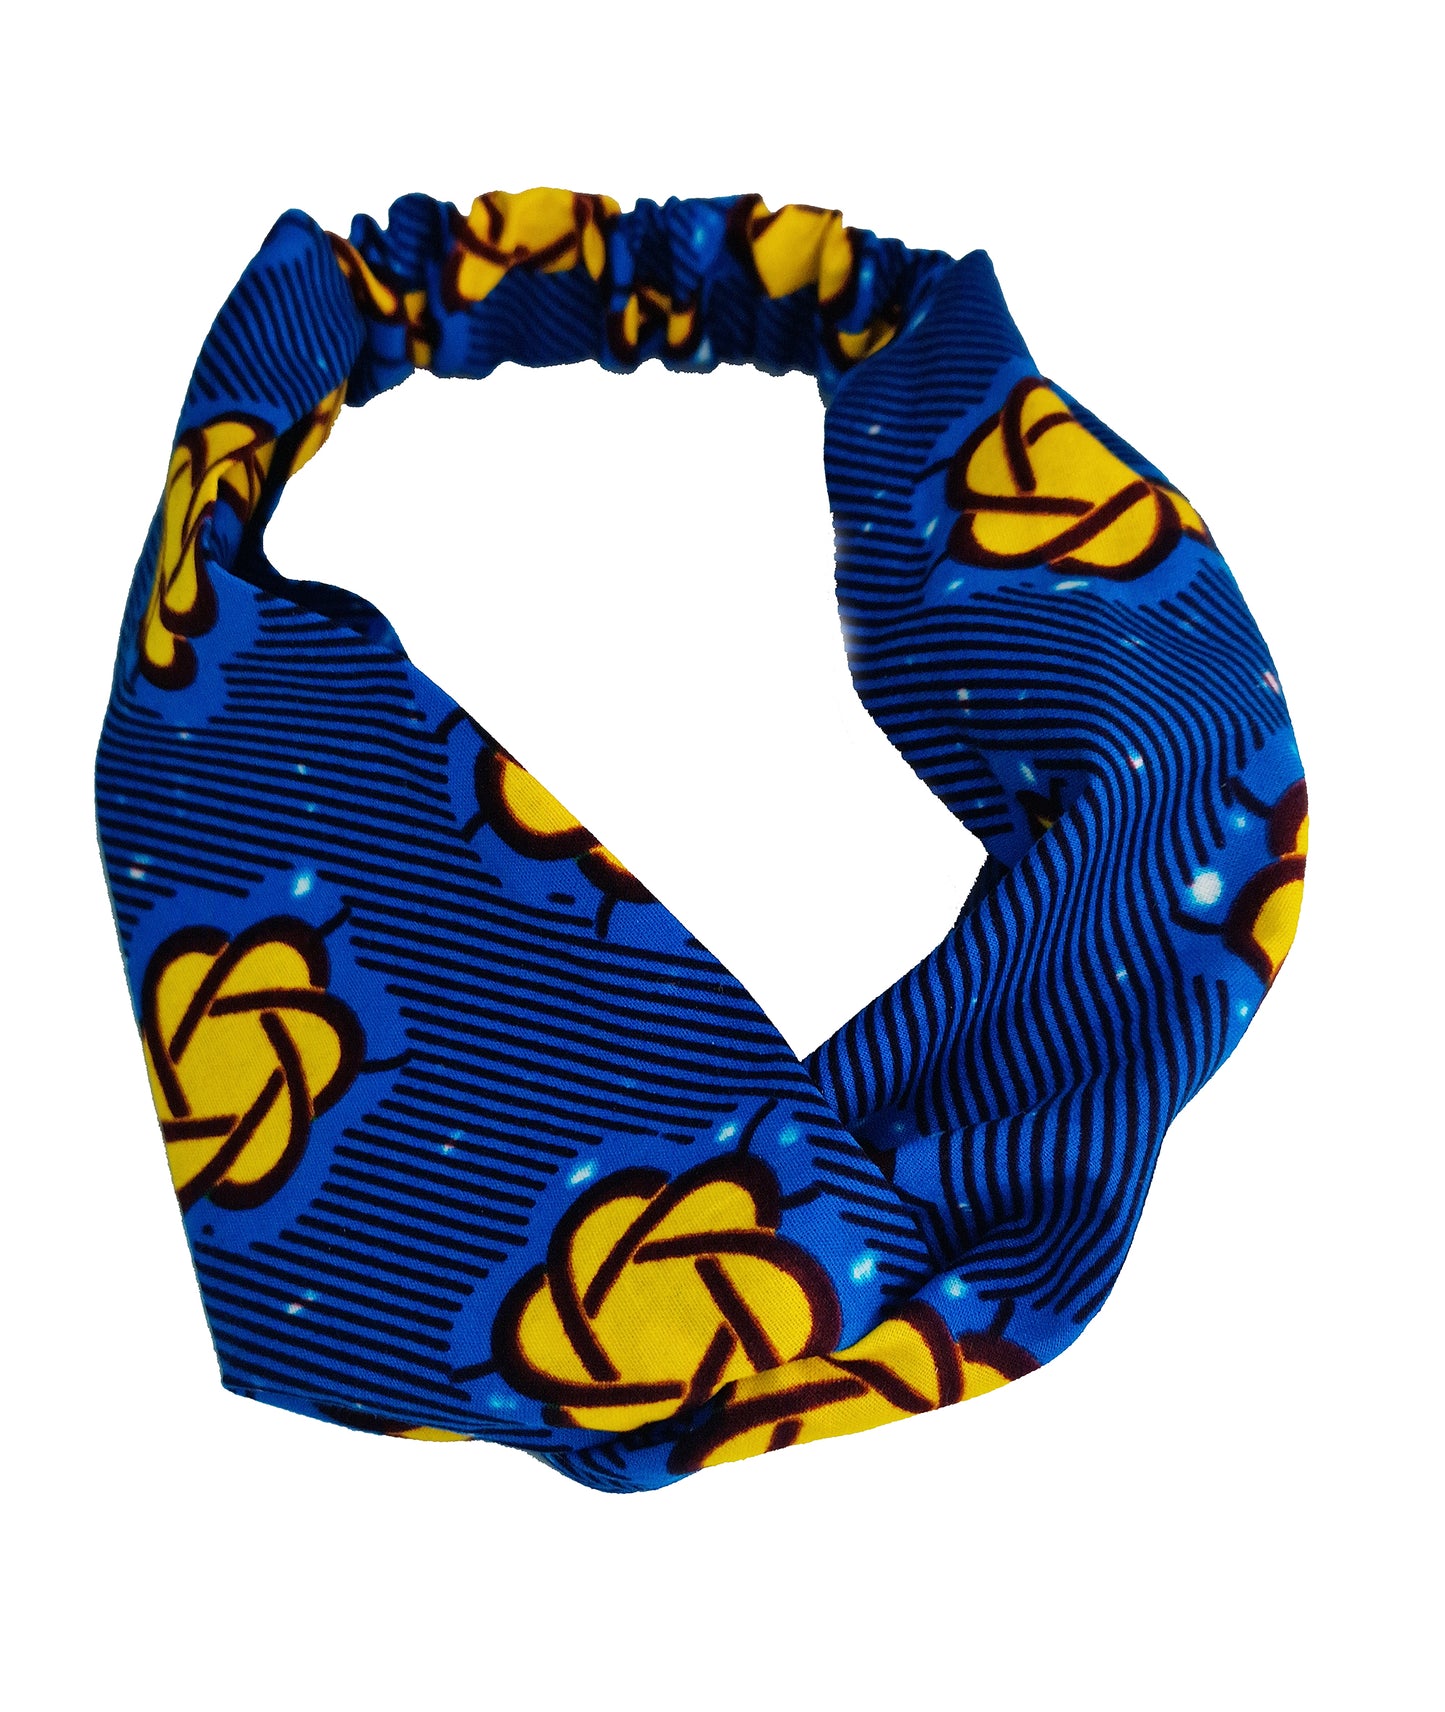 African Print Fabric Handmade Top Knot Headband Blue Ankara Cotton Elasticated Stretchy Wide Large by Dovetailed